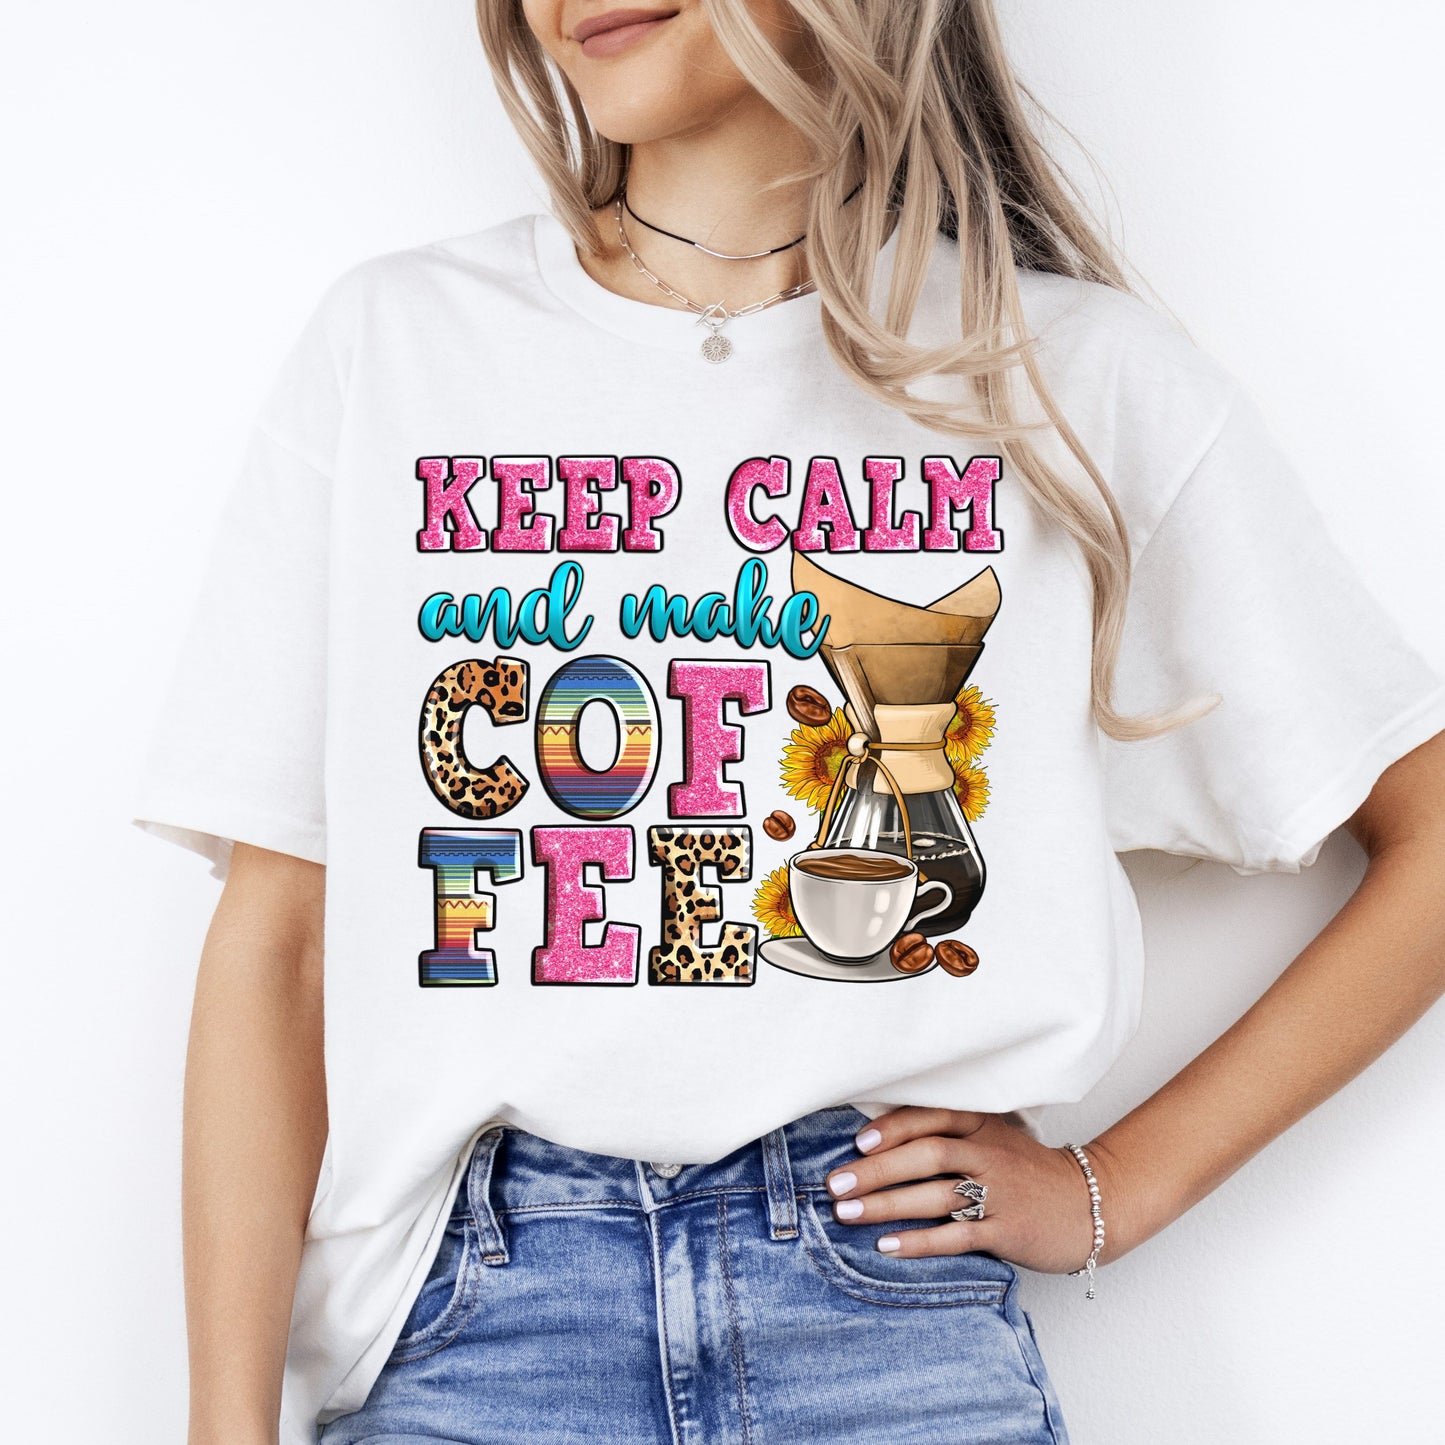 Keep calm and make coffee T-Shirt gift Coffee lover Unisex tee Sand White Sport Grey-White-Family-Gift-Planet